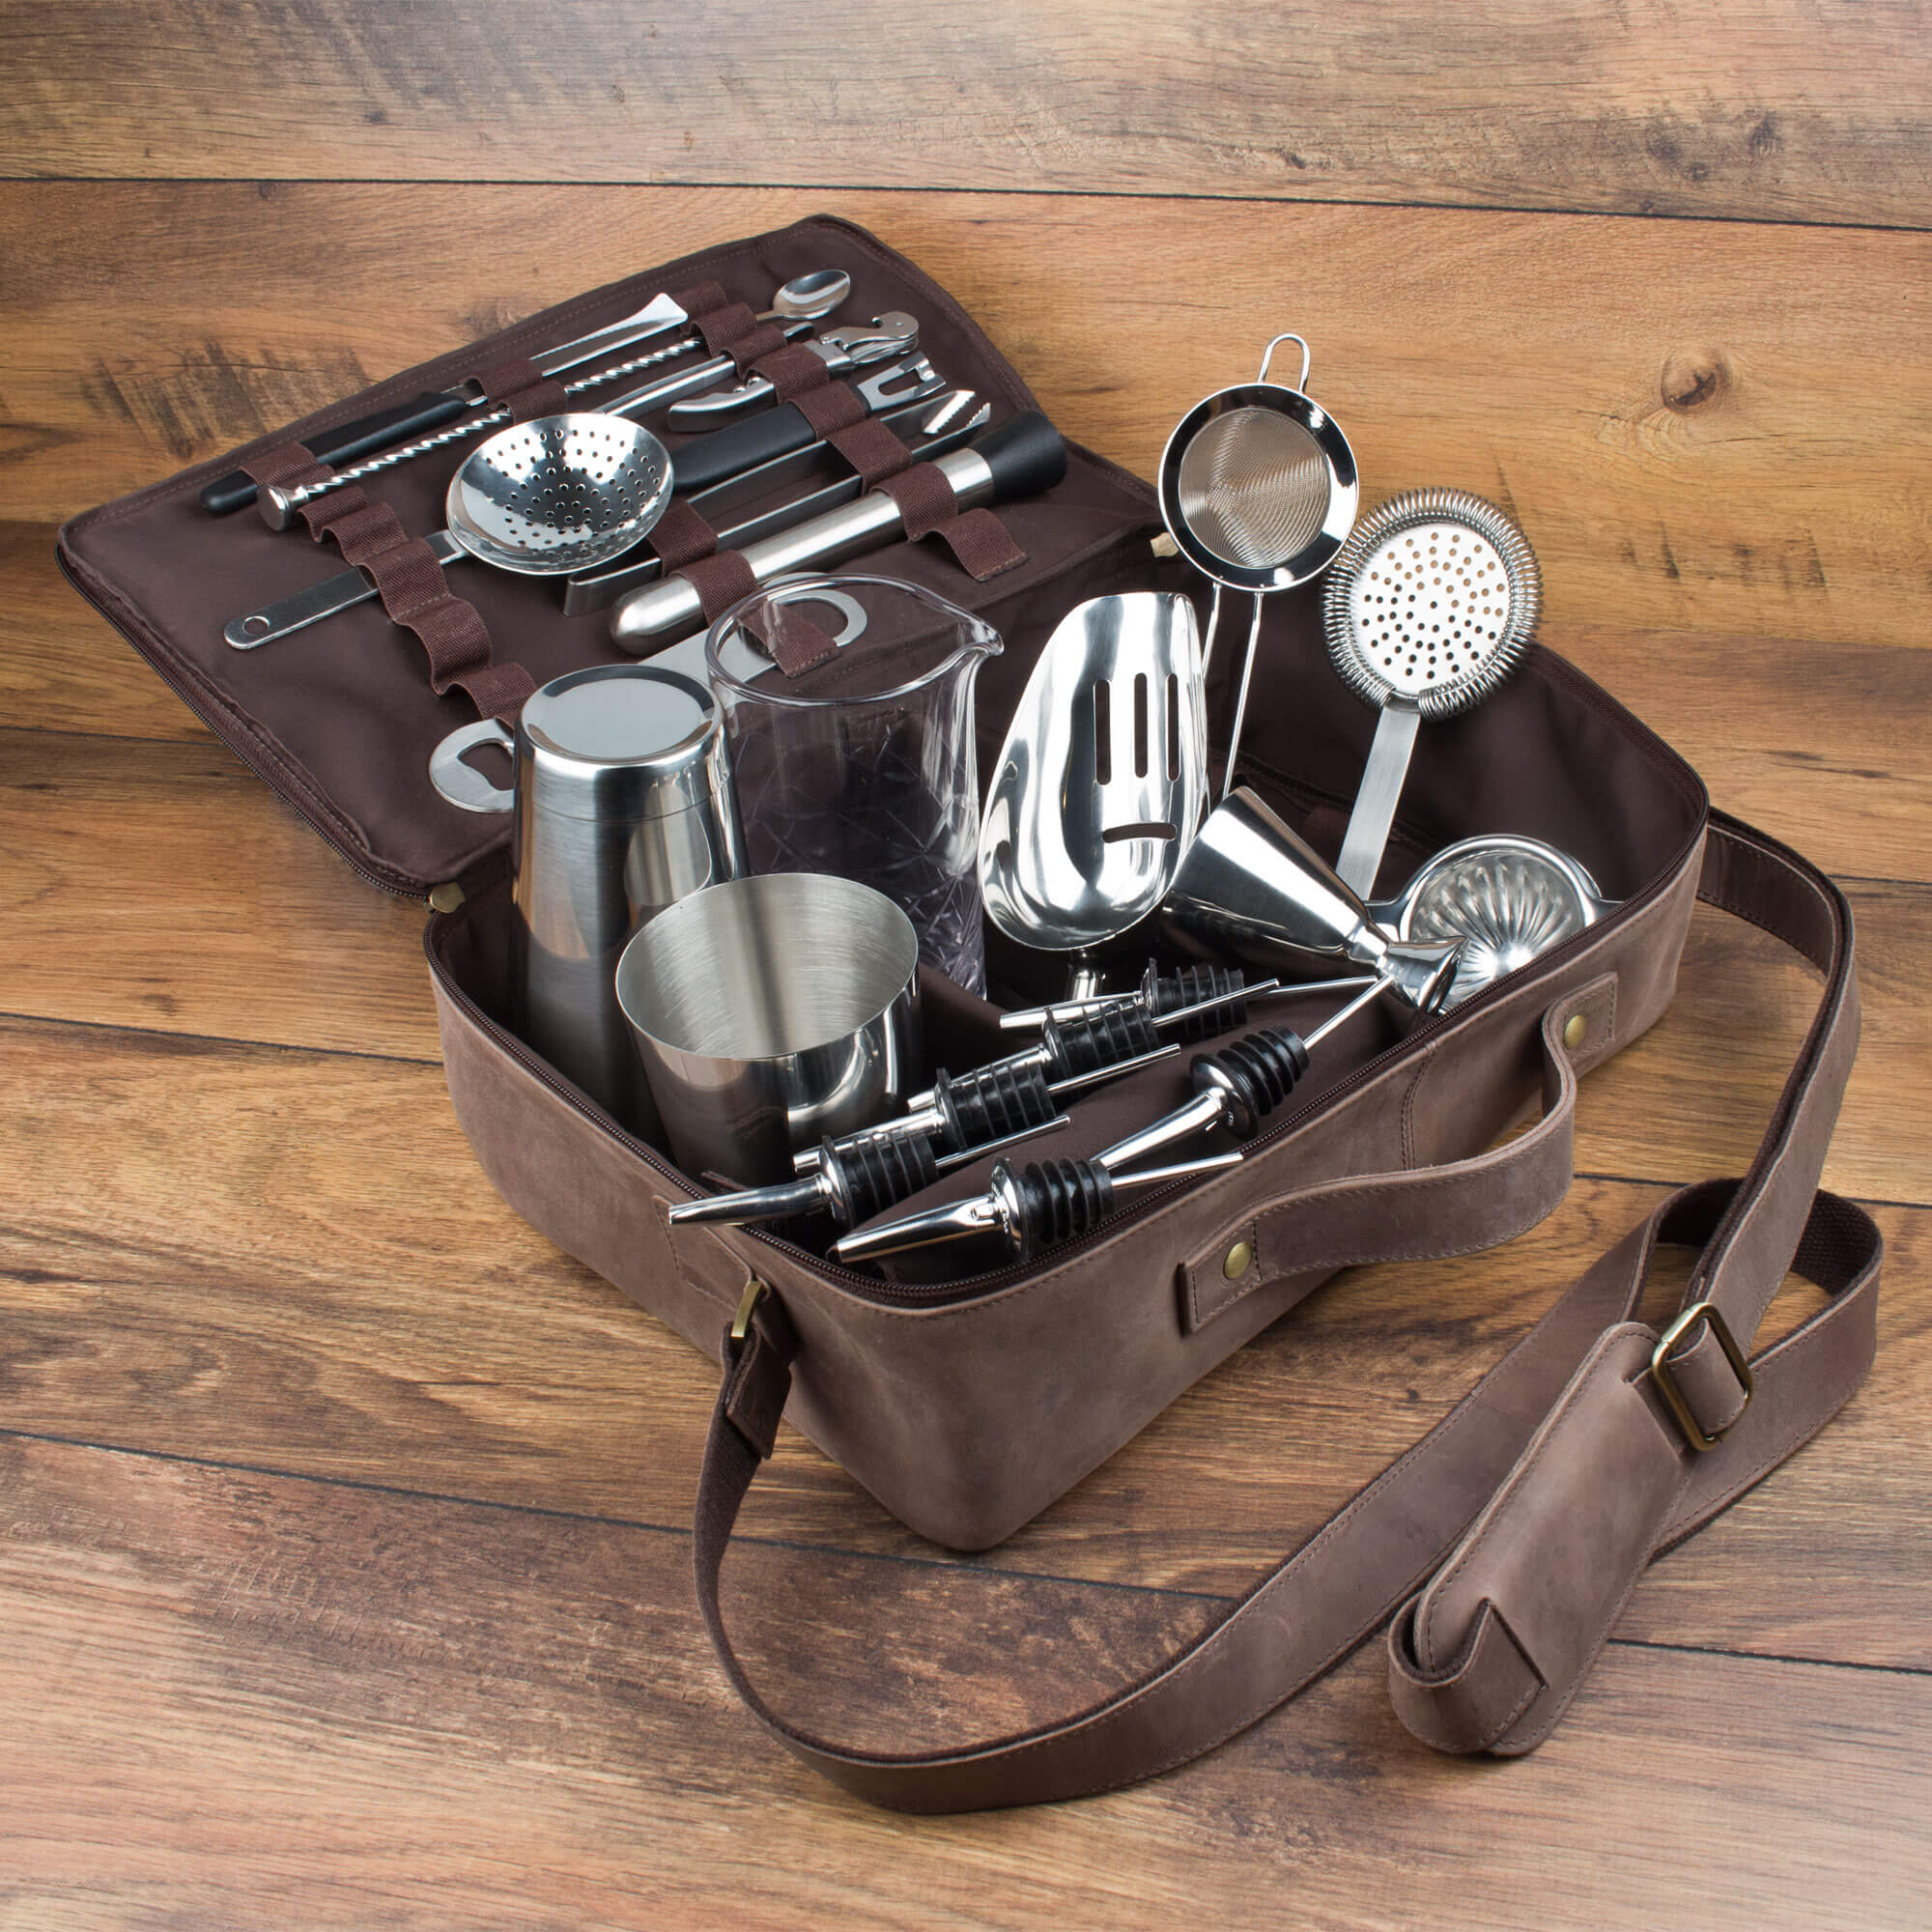 Bartender kit, Prime Bar - brown leather bag with bar tools (Tin in Tin)